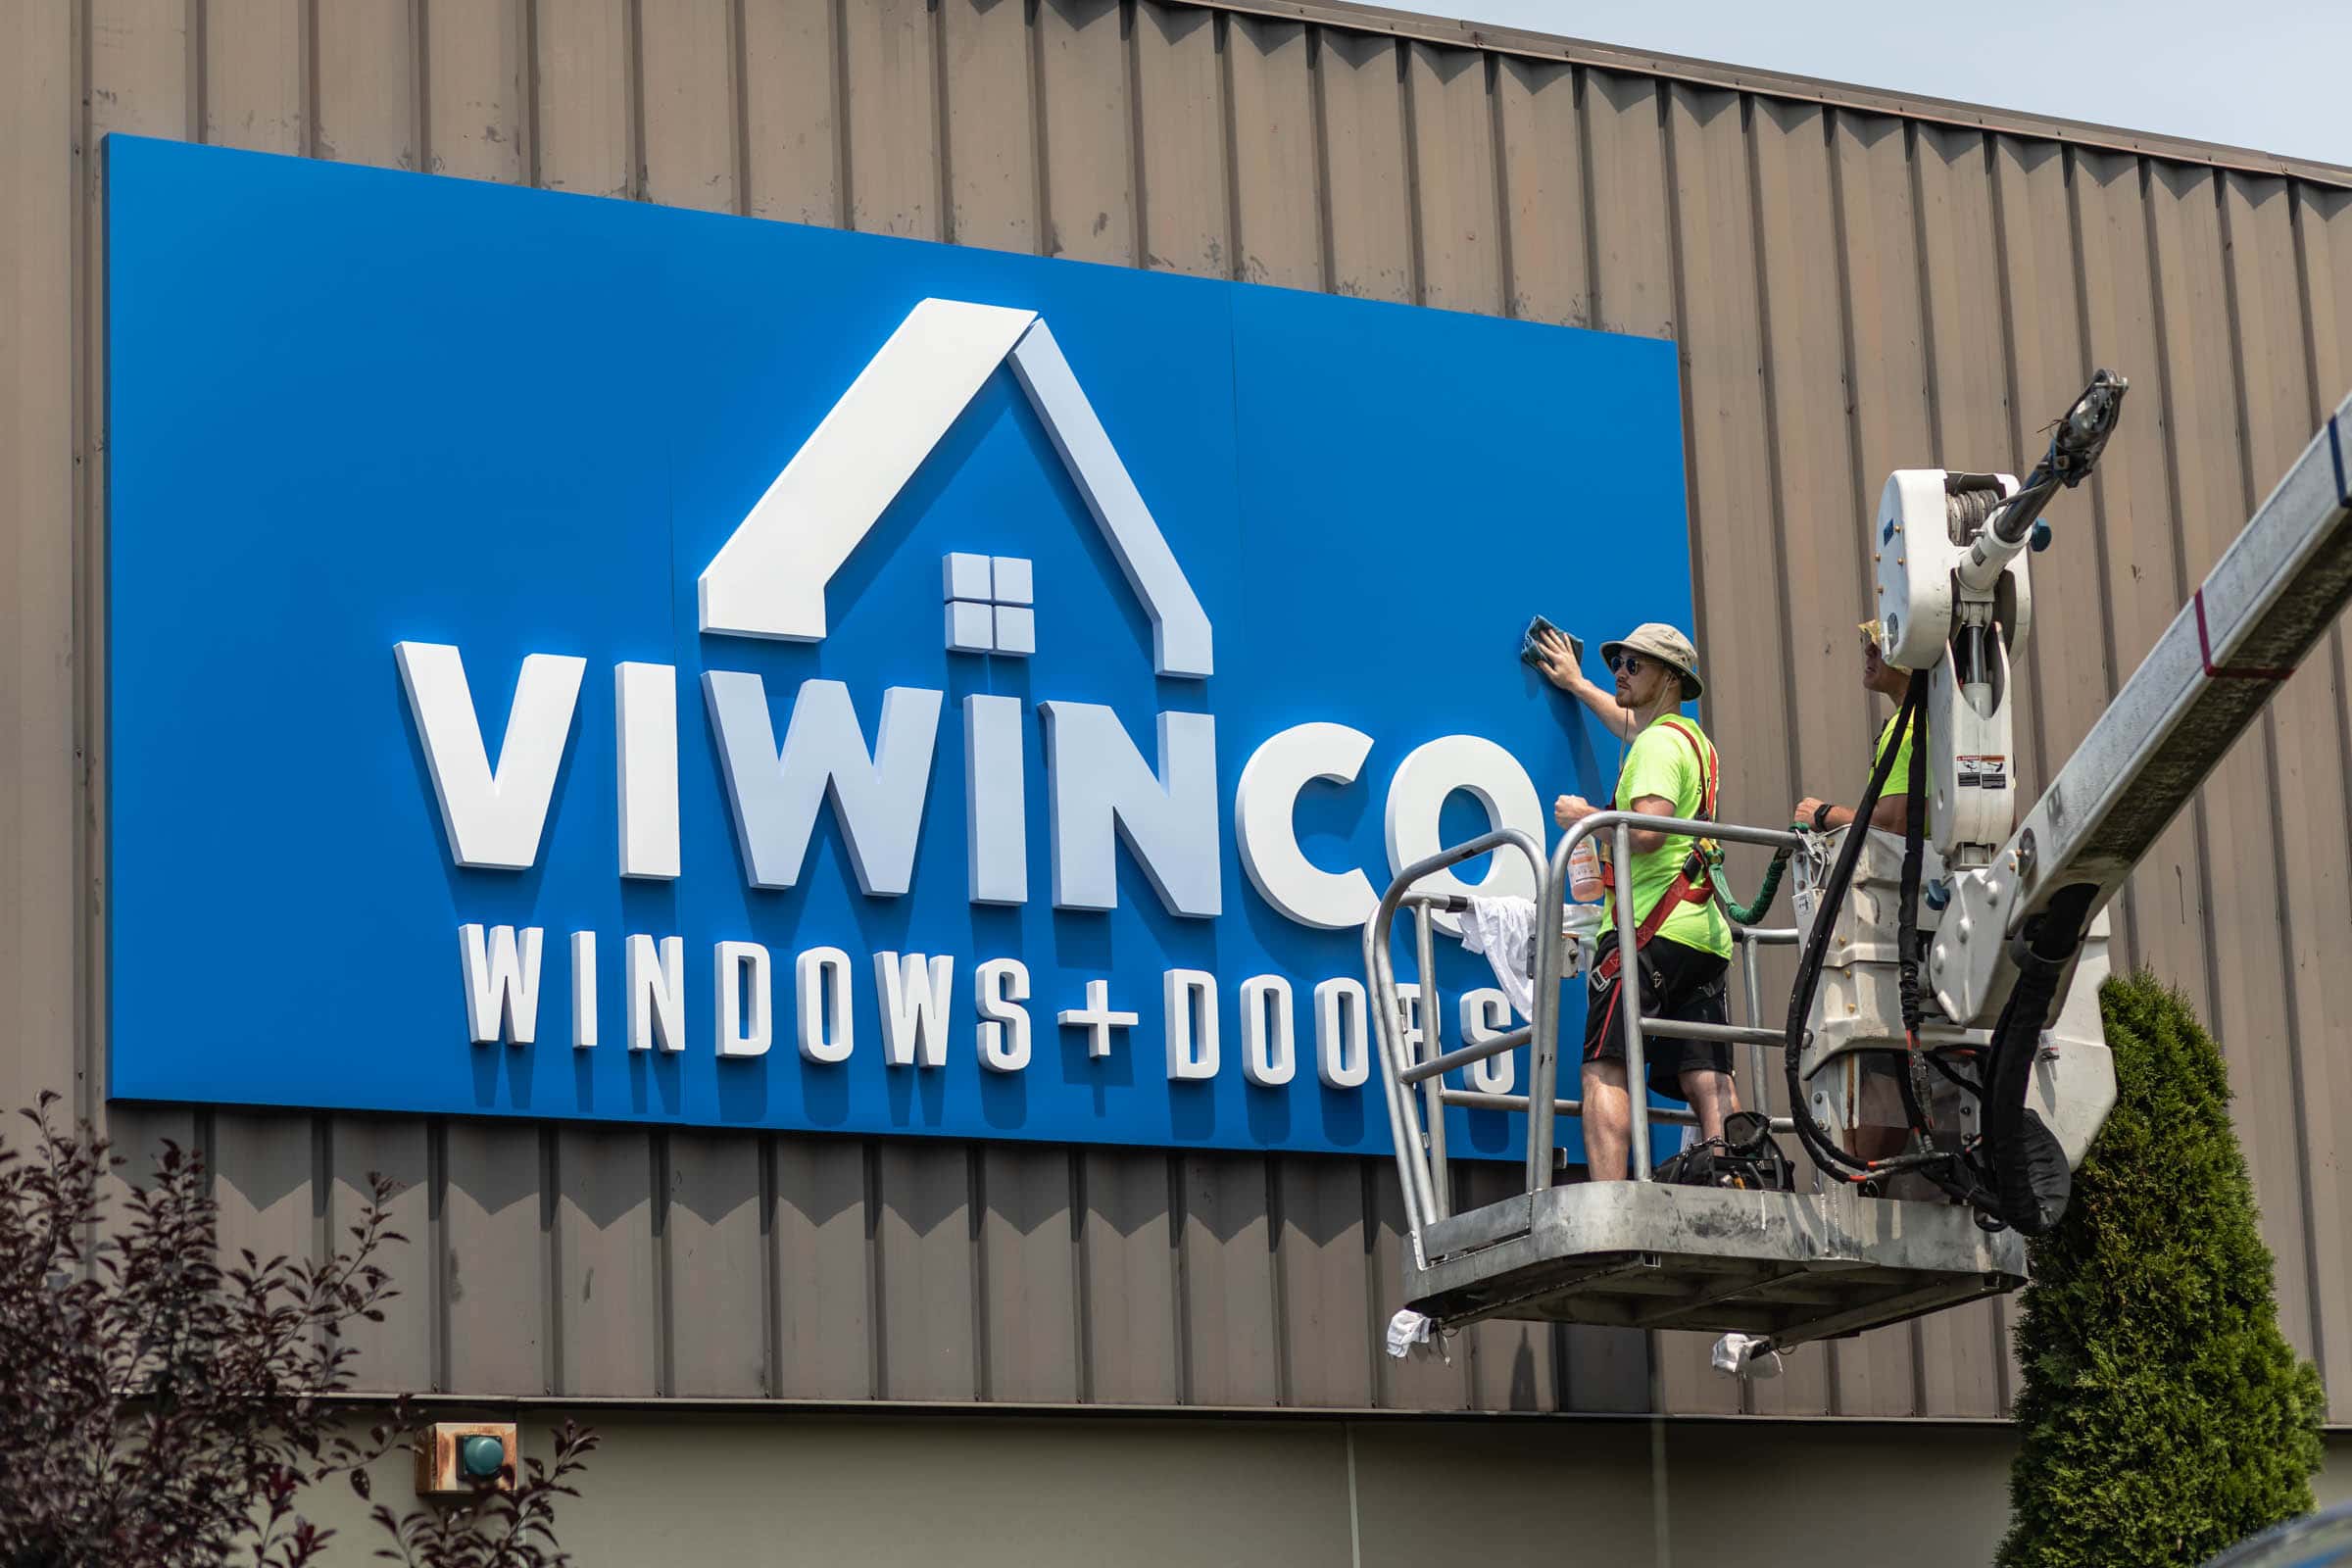 Construction worker buffing Viwinco sign with new branding.